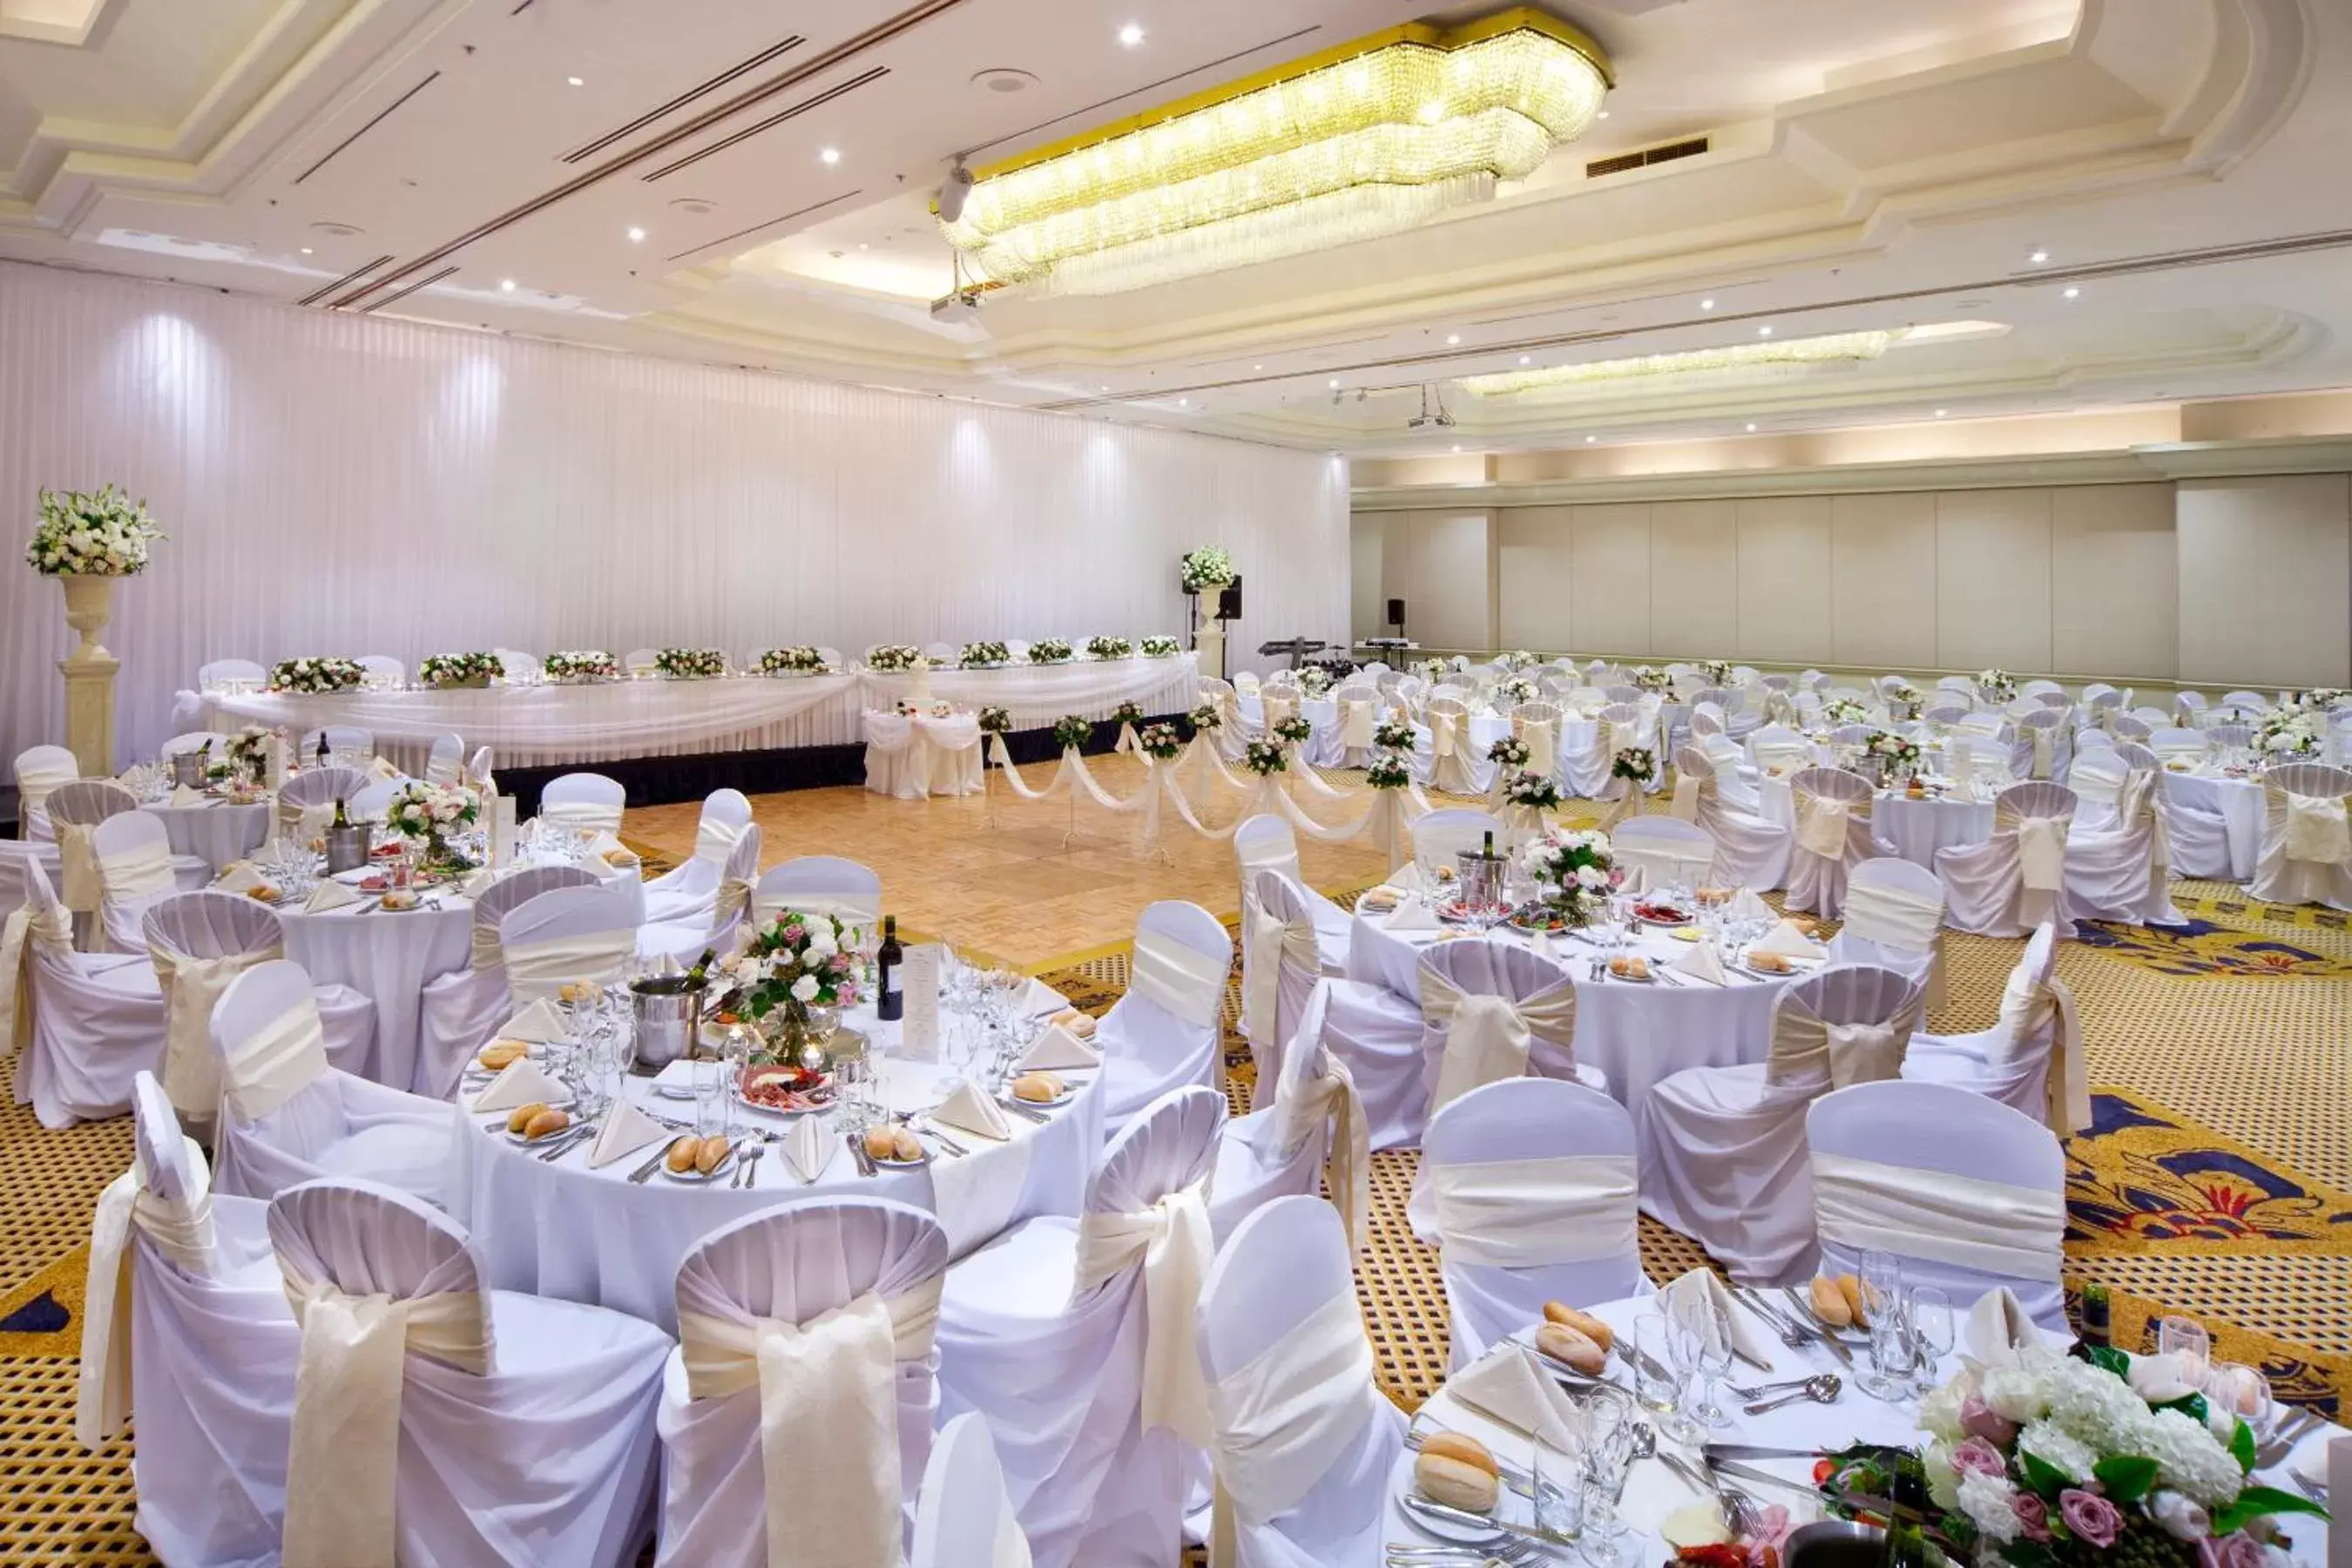 Banquet/Function facilities, Banquet Facilities in Stamford Plaza Sydney Airport Hotel & Conference Centre